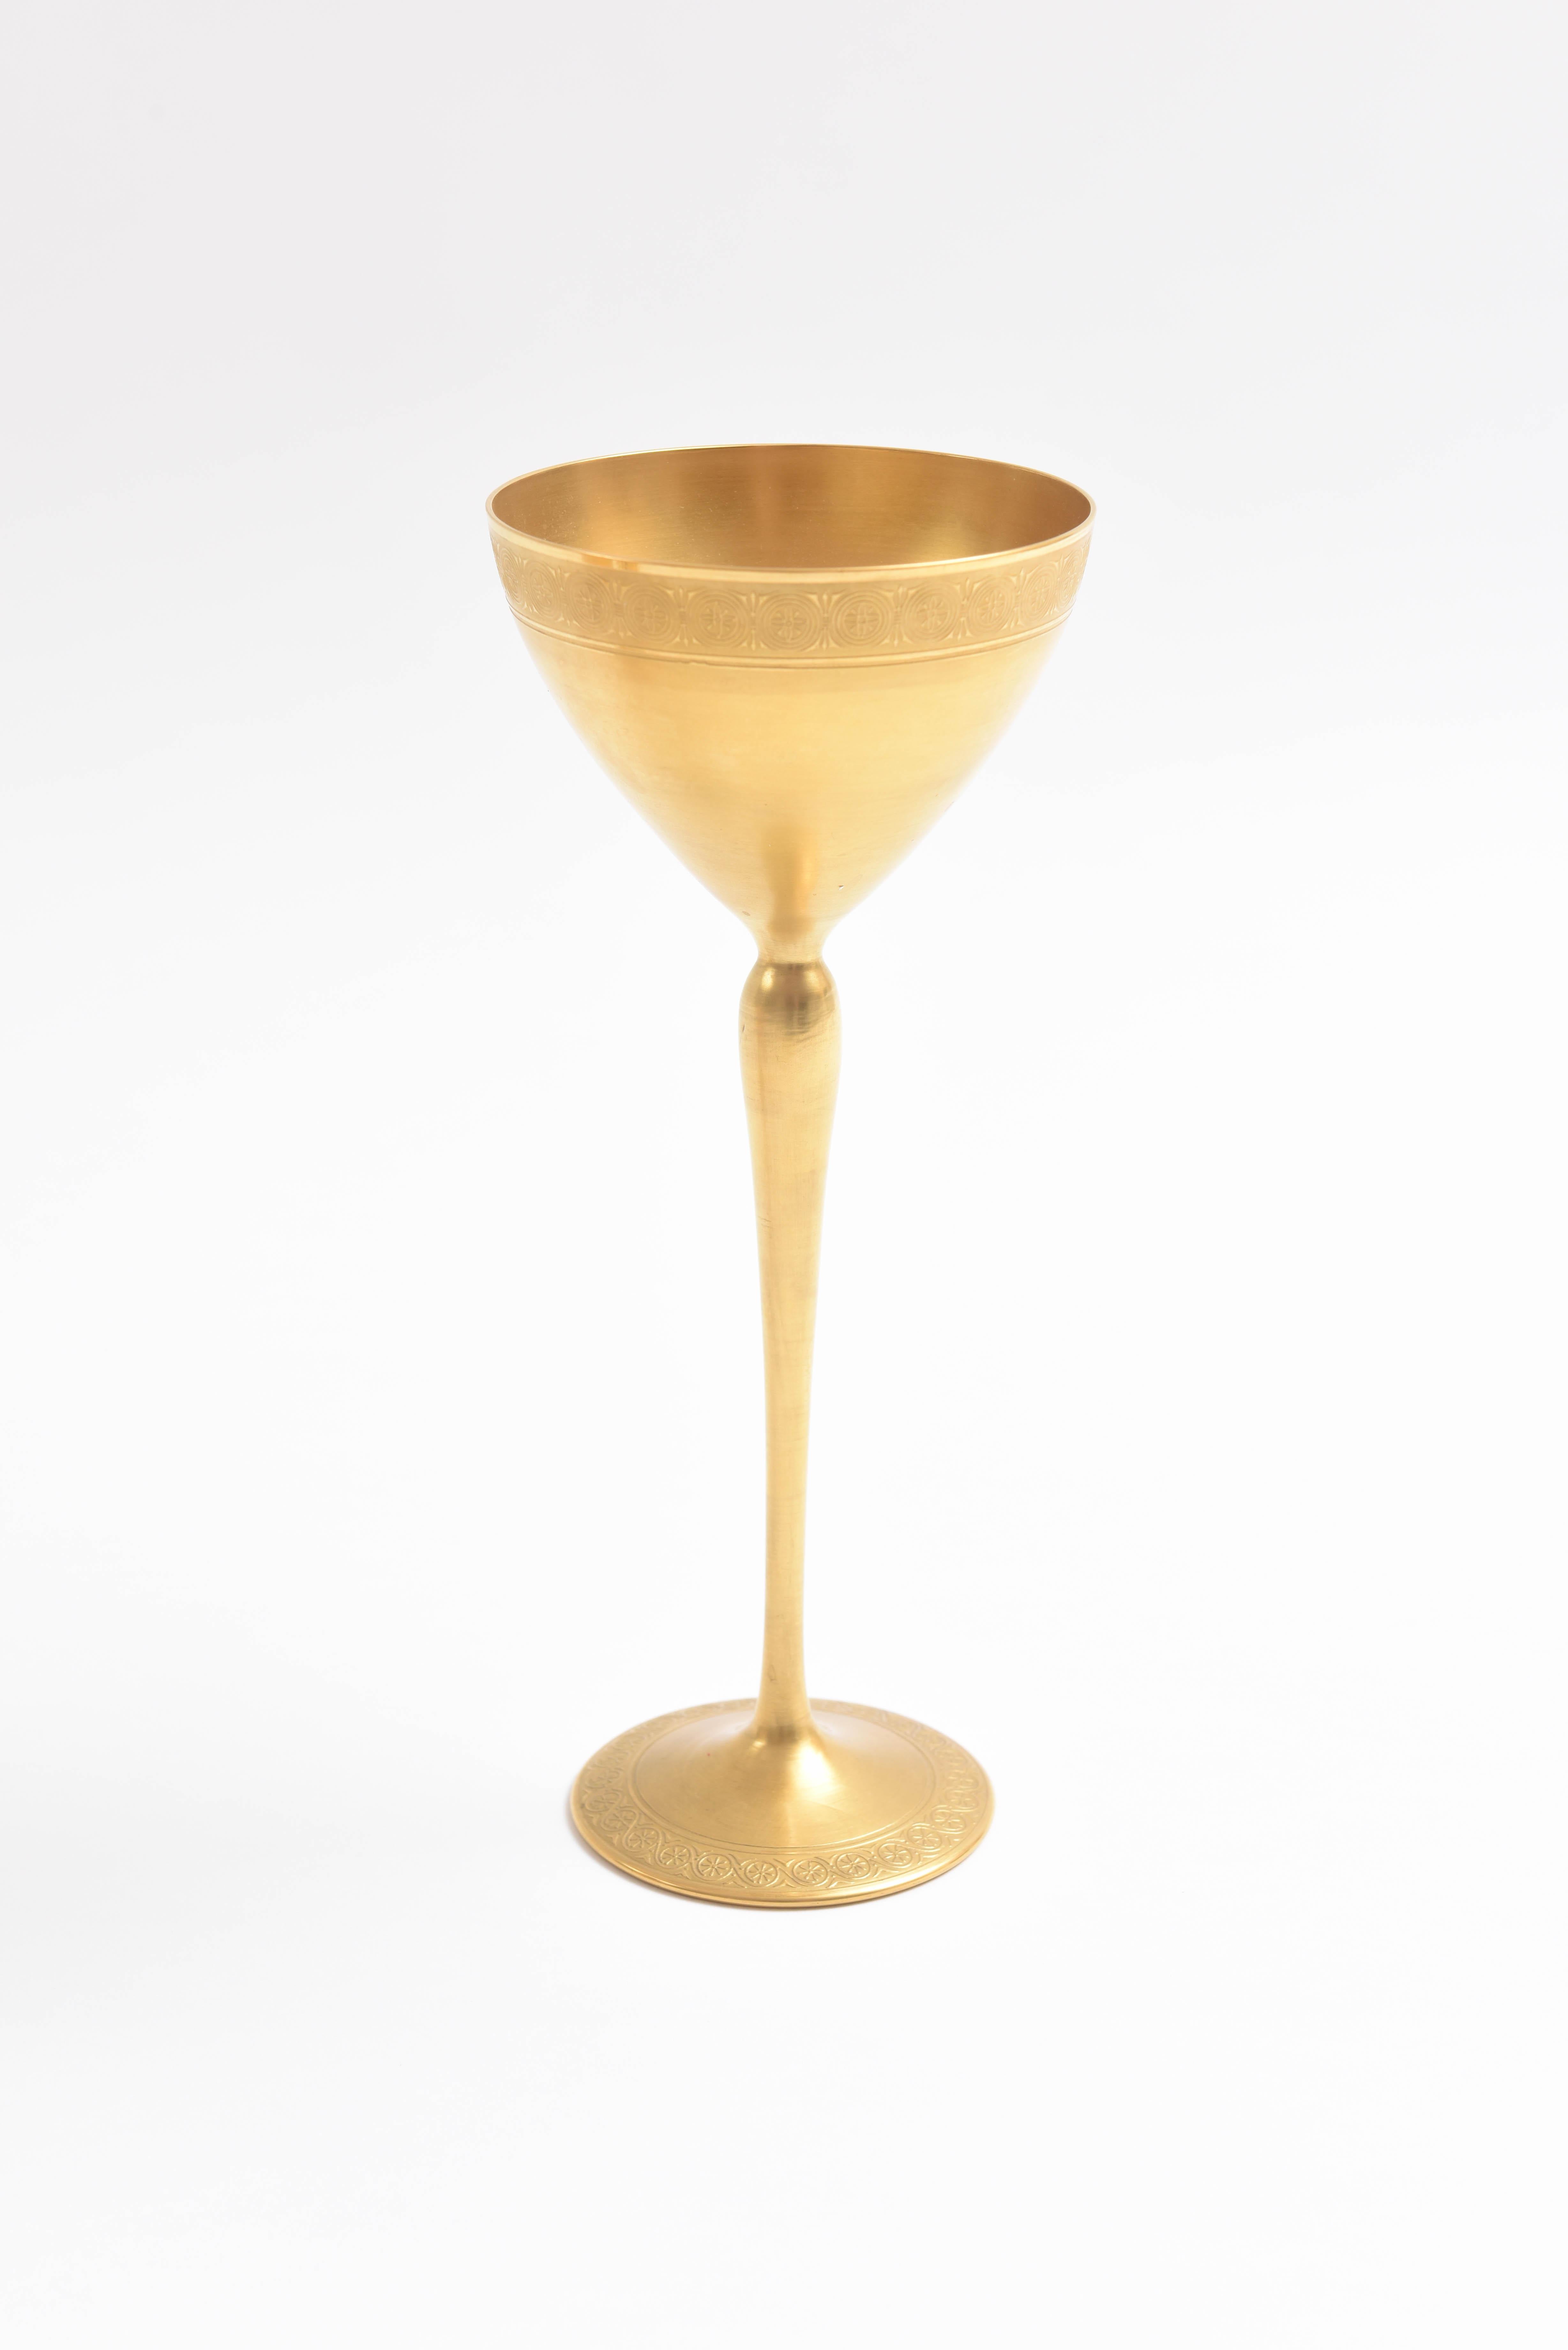 A wonderful opportunity to add an elegant set of stem ware to your collections! We fell in love with the very tall set of 12 white wine glasses and then realized there were 20 goblets! Added in are 12 champagne coupes, some port wine glasses, side